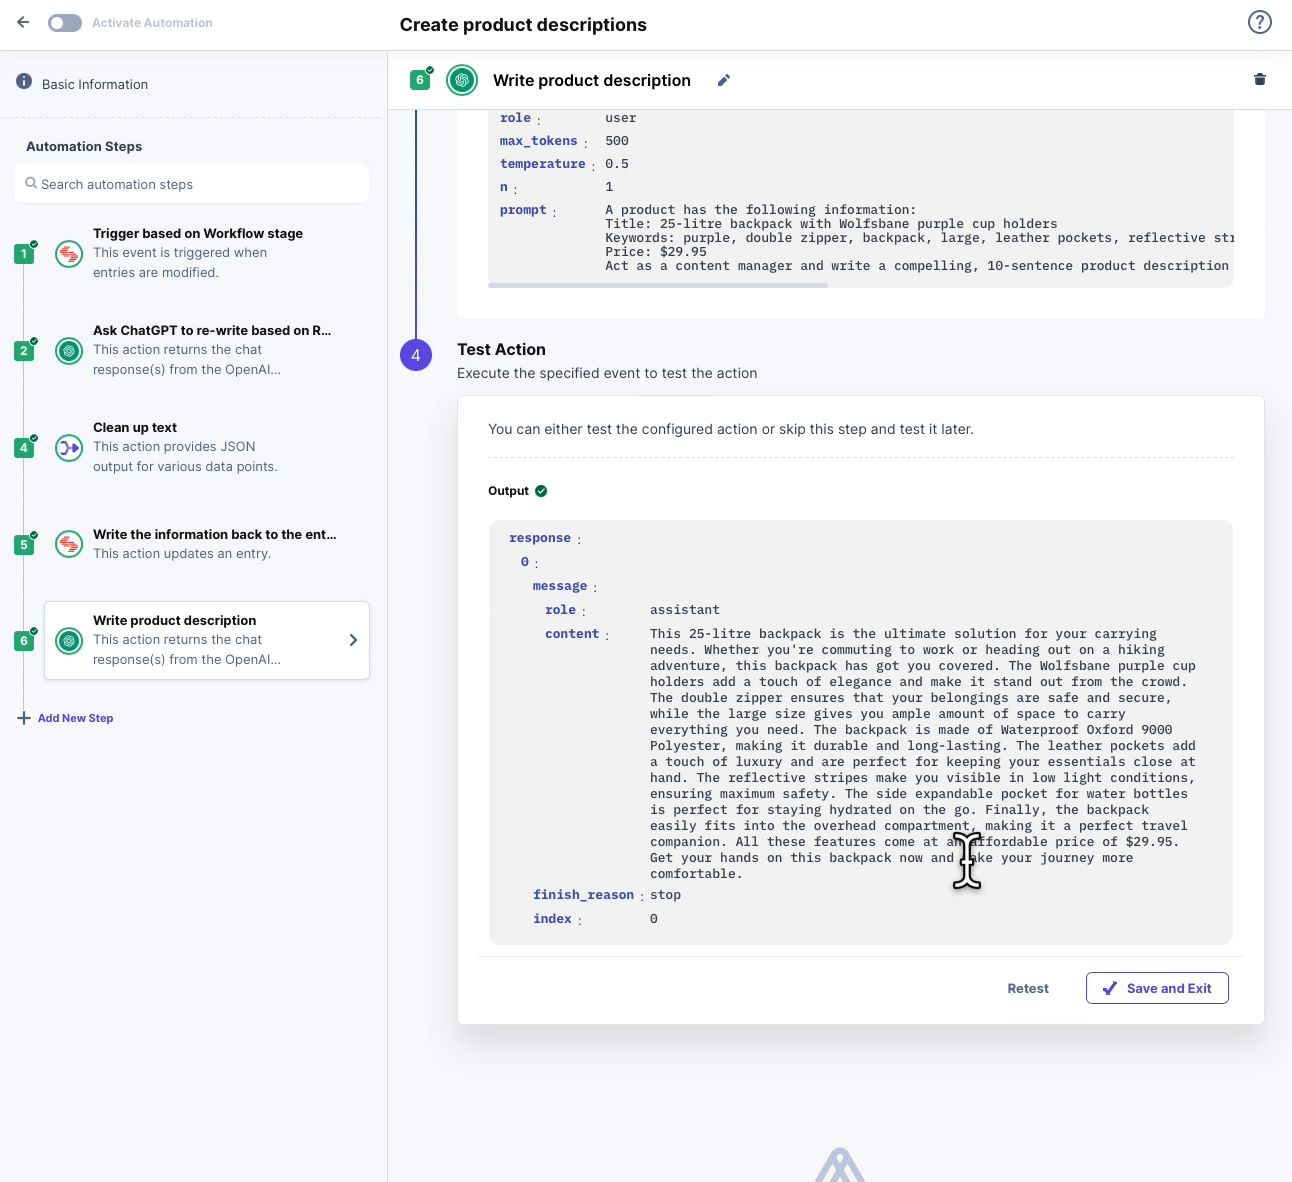 Screenshot for crafting engaging product descriptions using the ChatGPT connector in Contentstack Automation Hub.